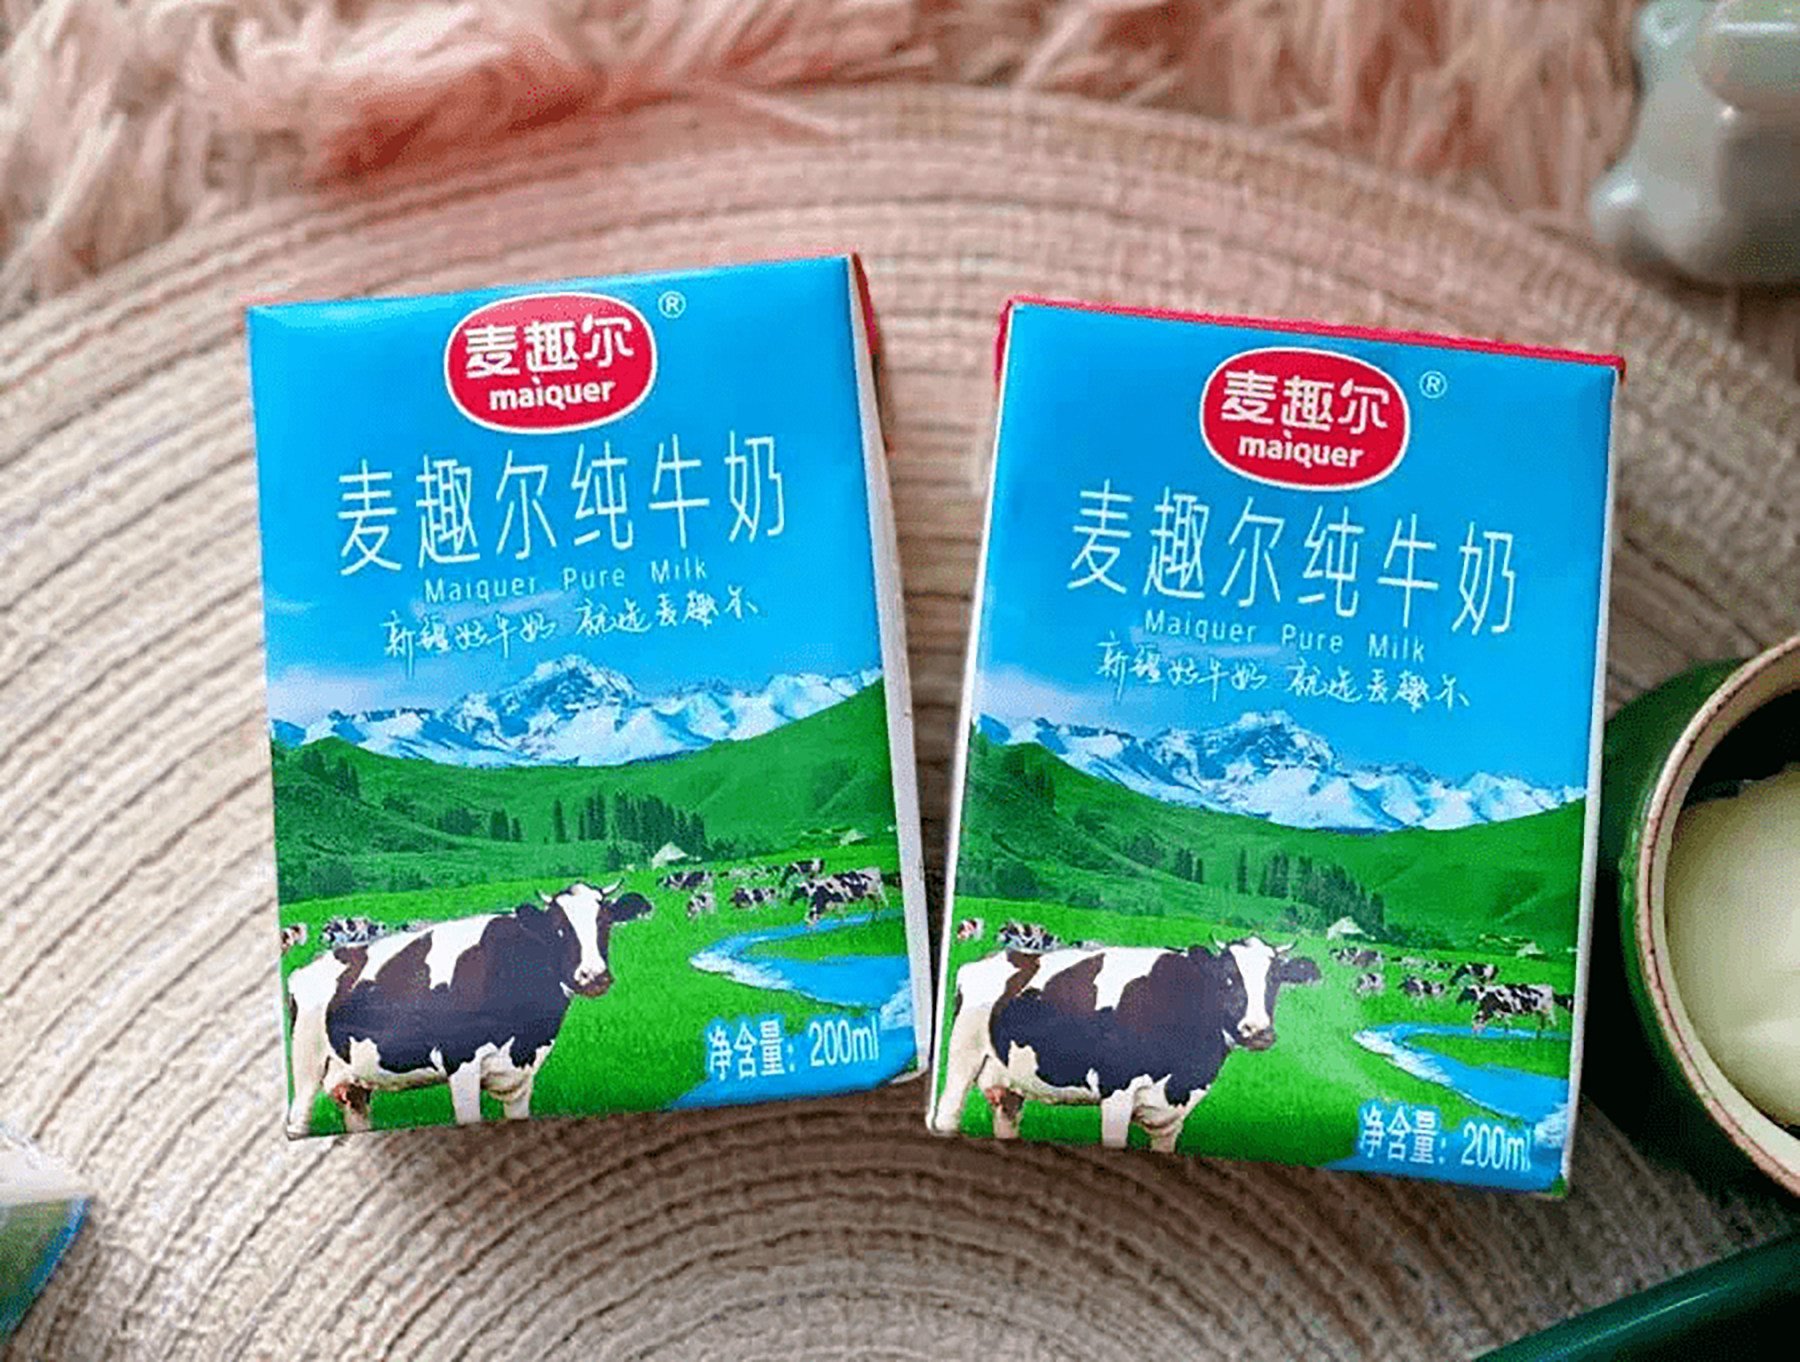 China’s market regulator says an unauthorised additive was found in a number of batches of Maiquer pure milk. Photo: Handout